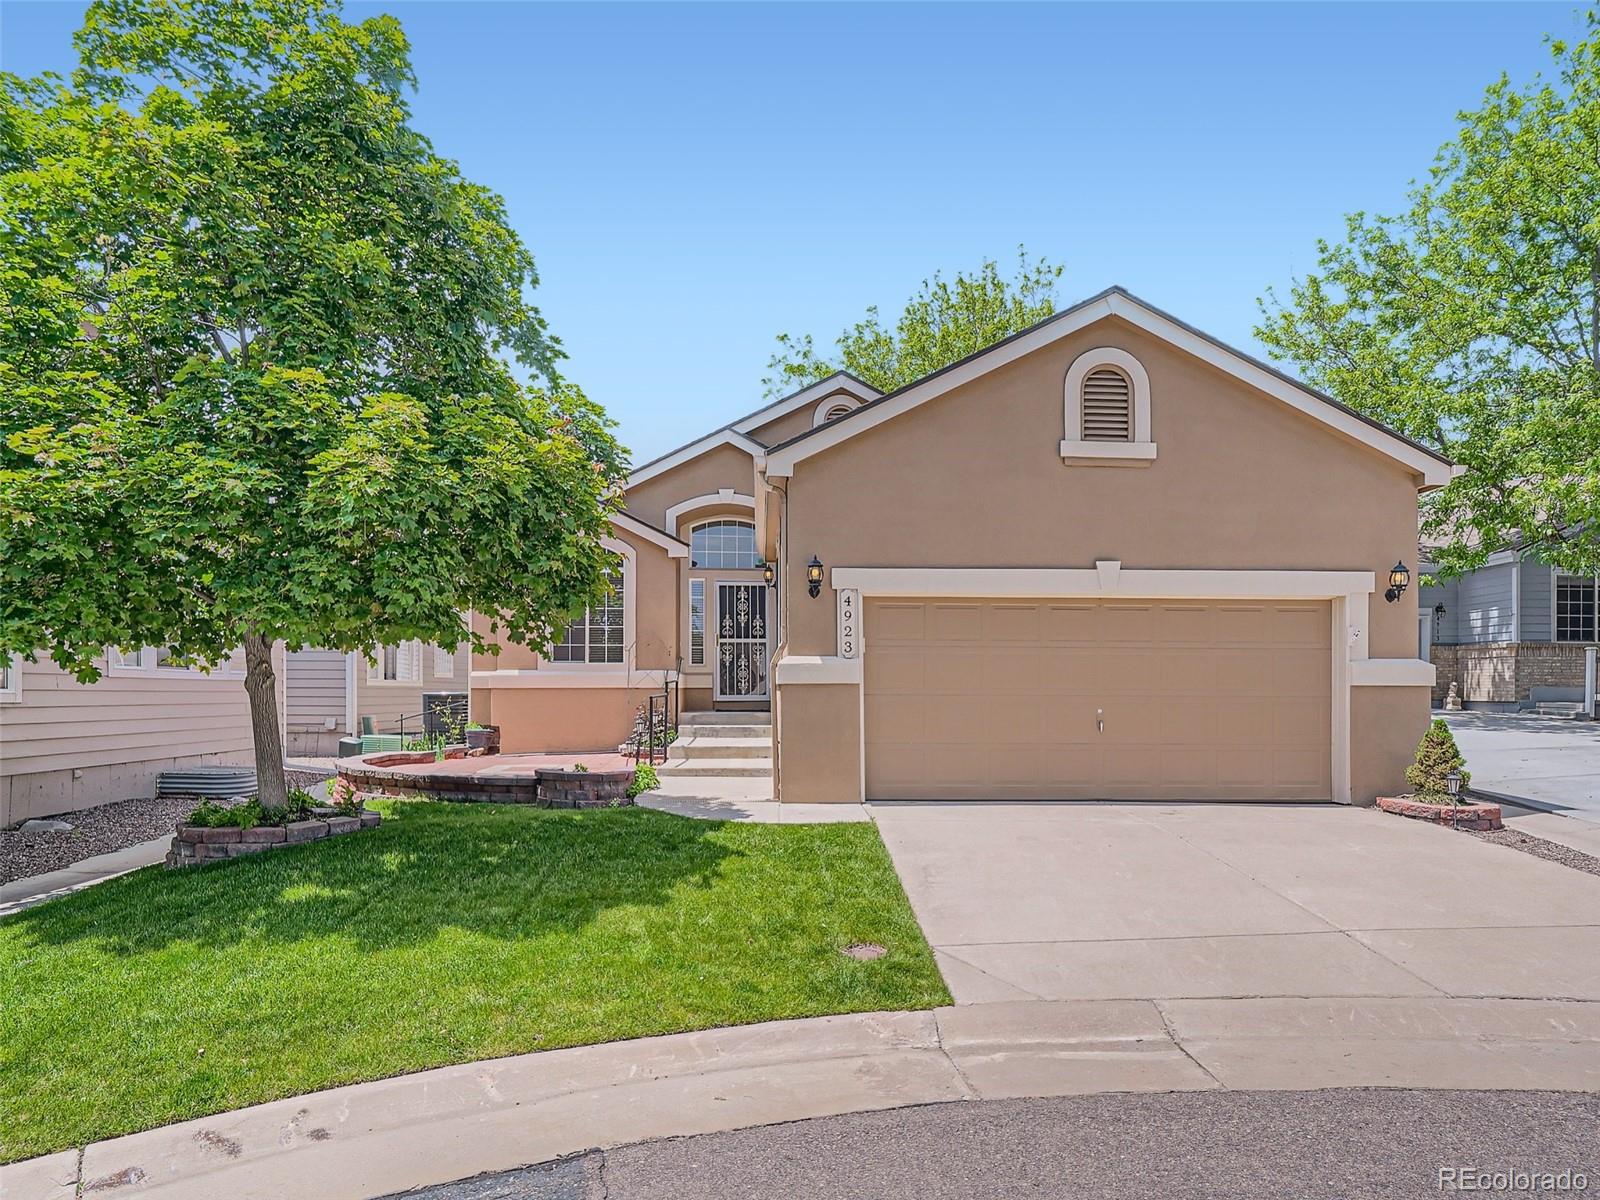 4923 s nelson court, Littleton sold home. Closed on 2024-03-22 for $595,000.